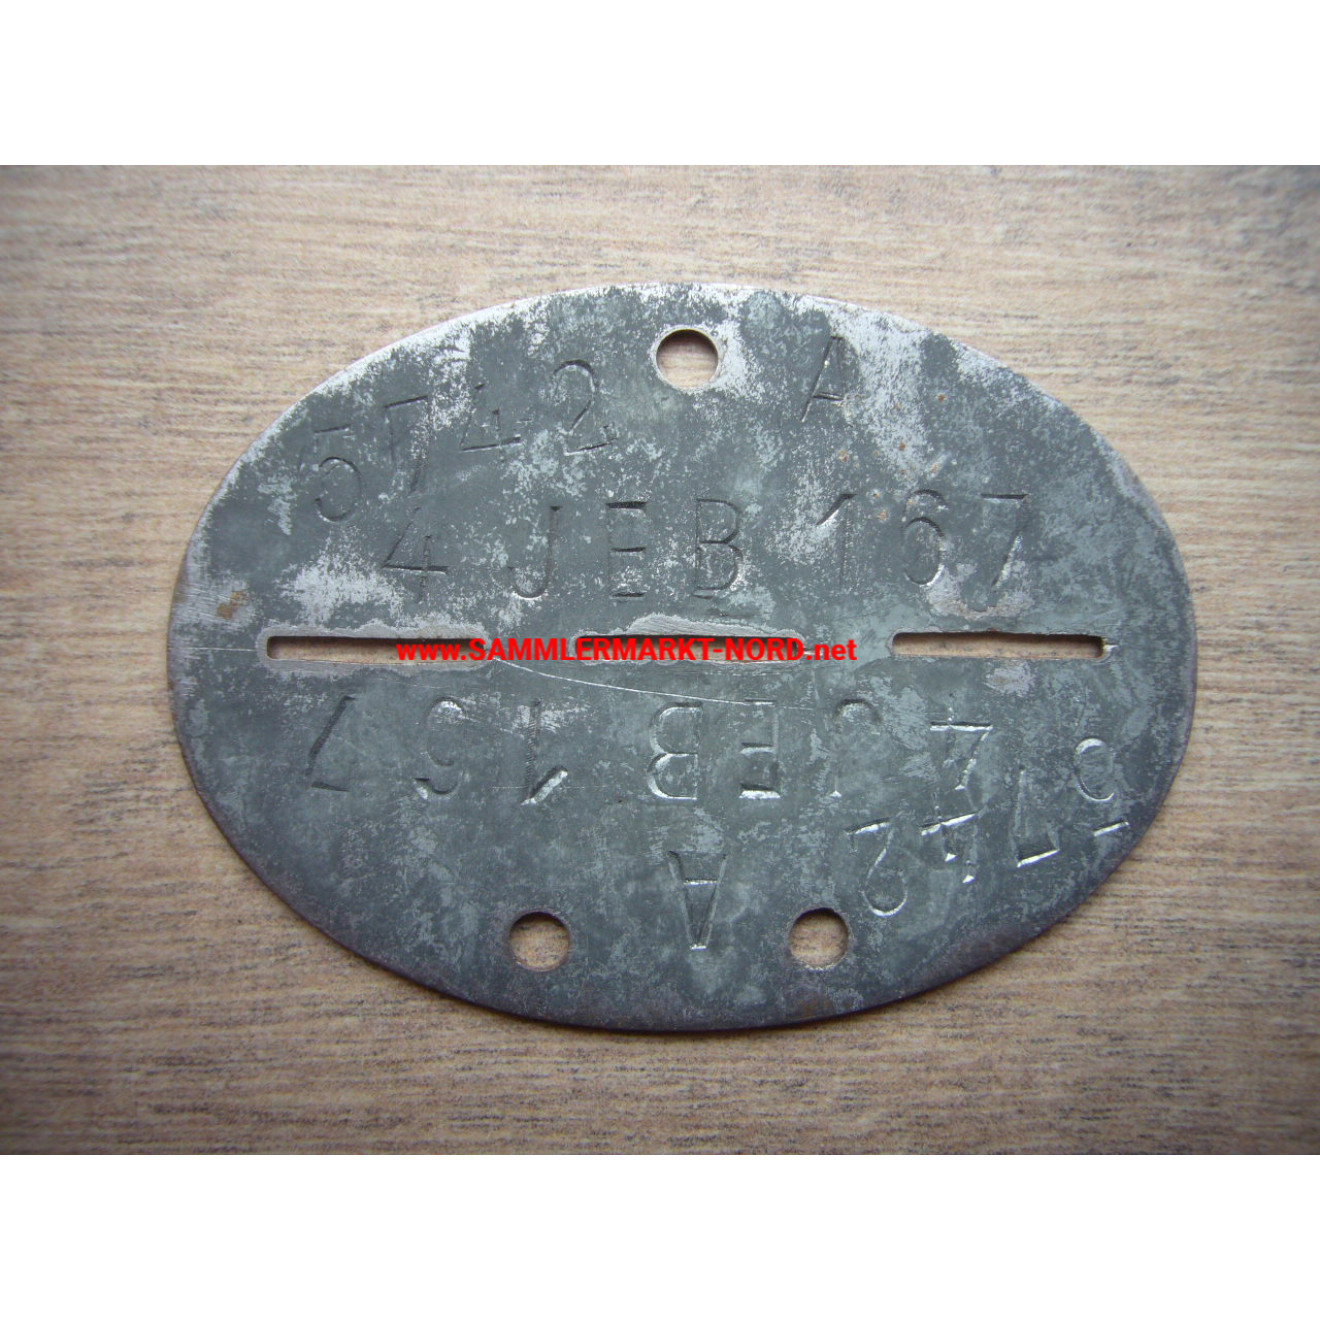 4. Infantry Replacement Battalion 167 - dog tag